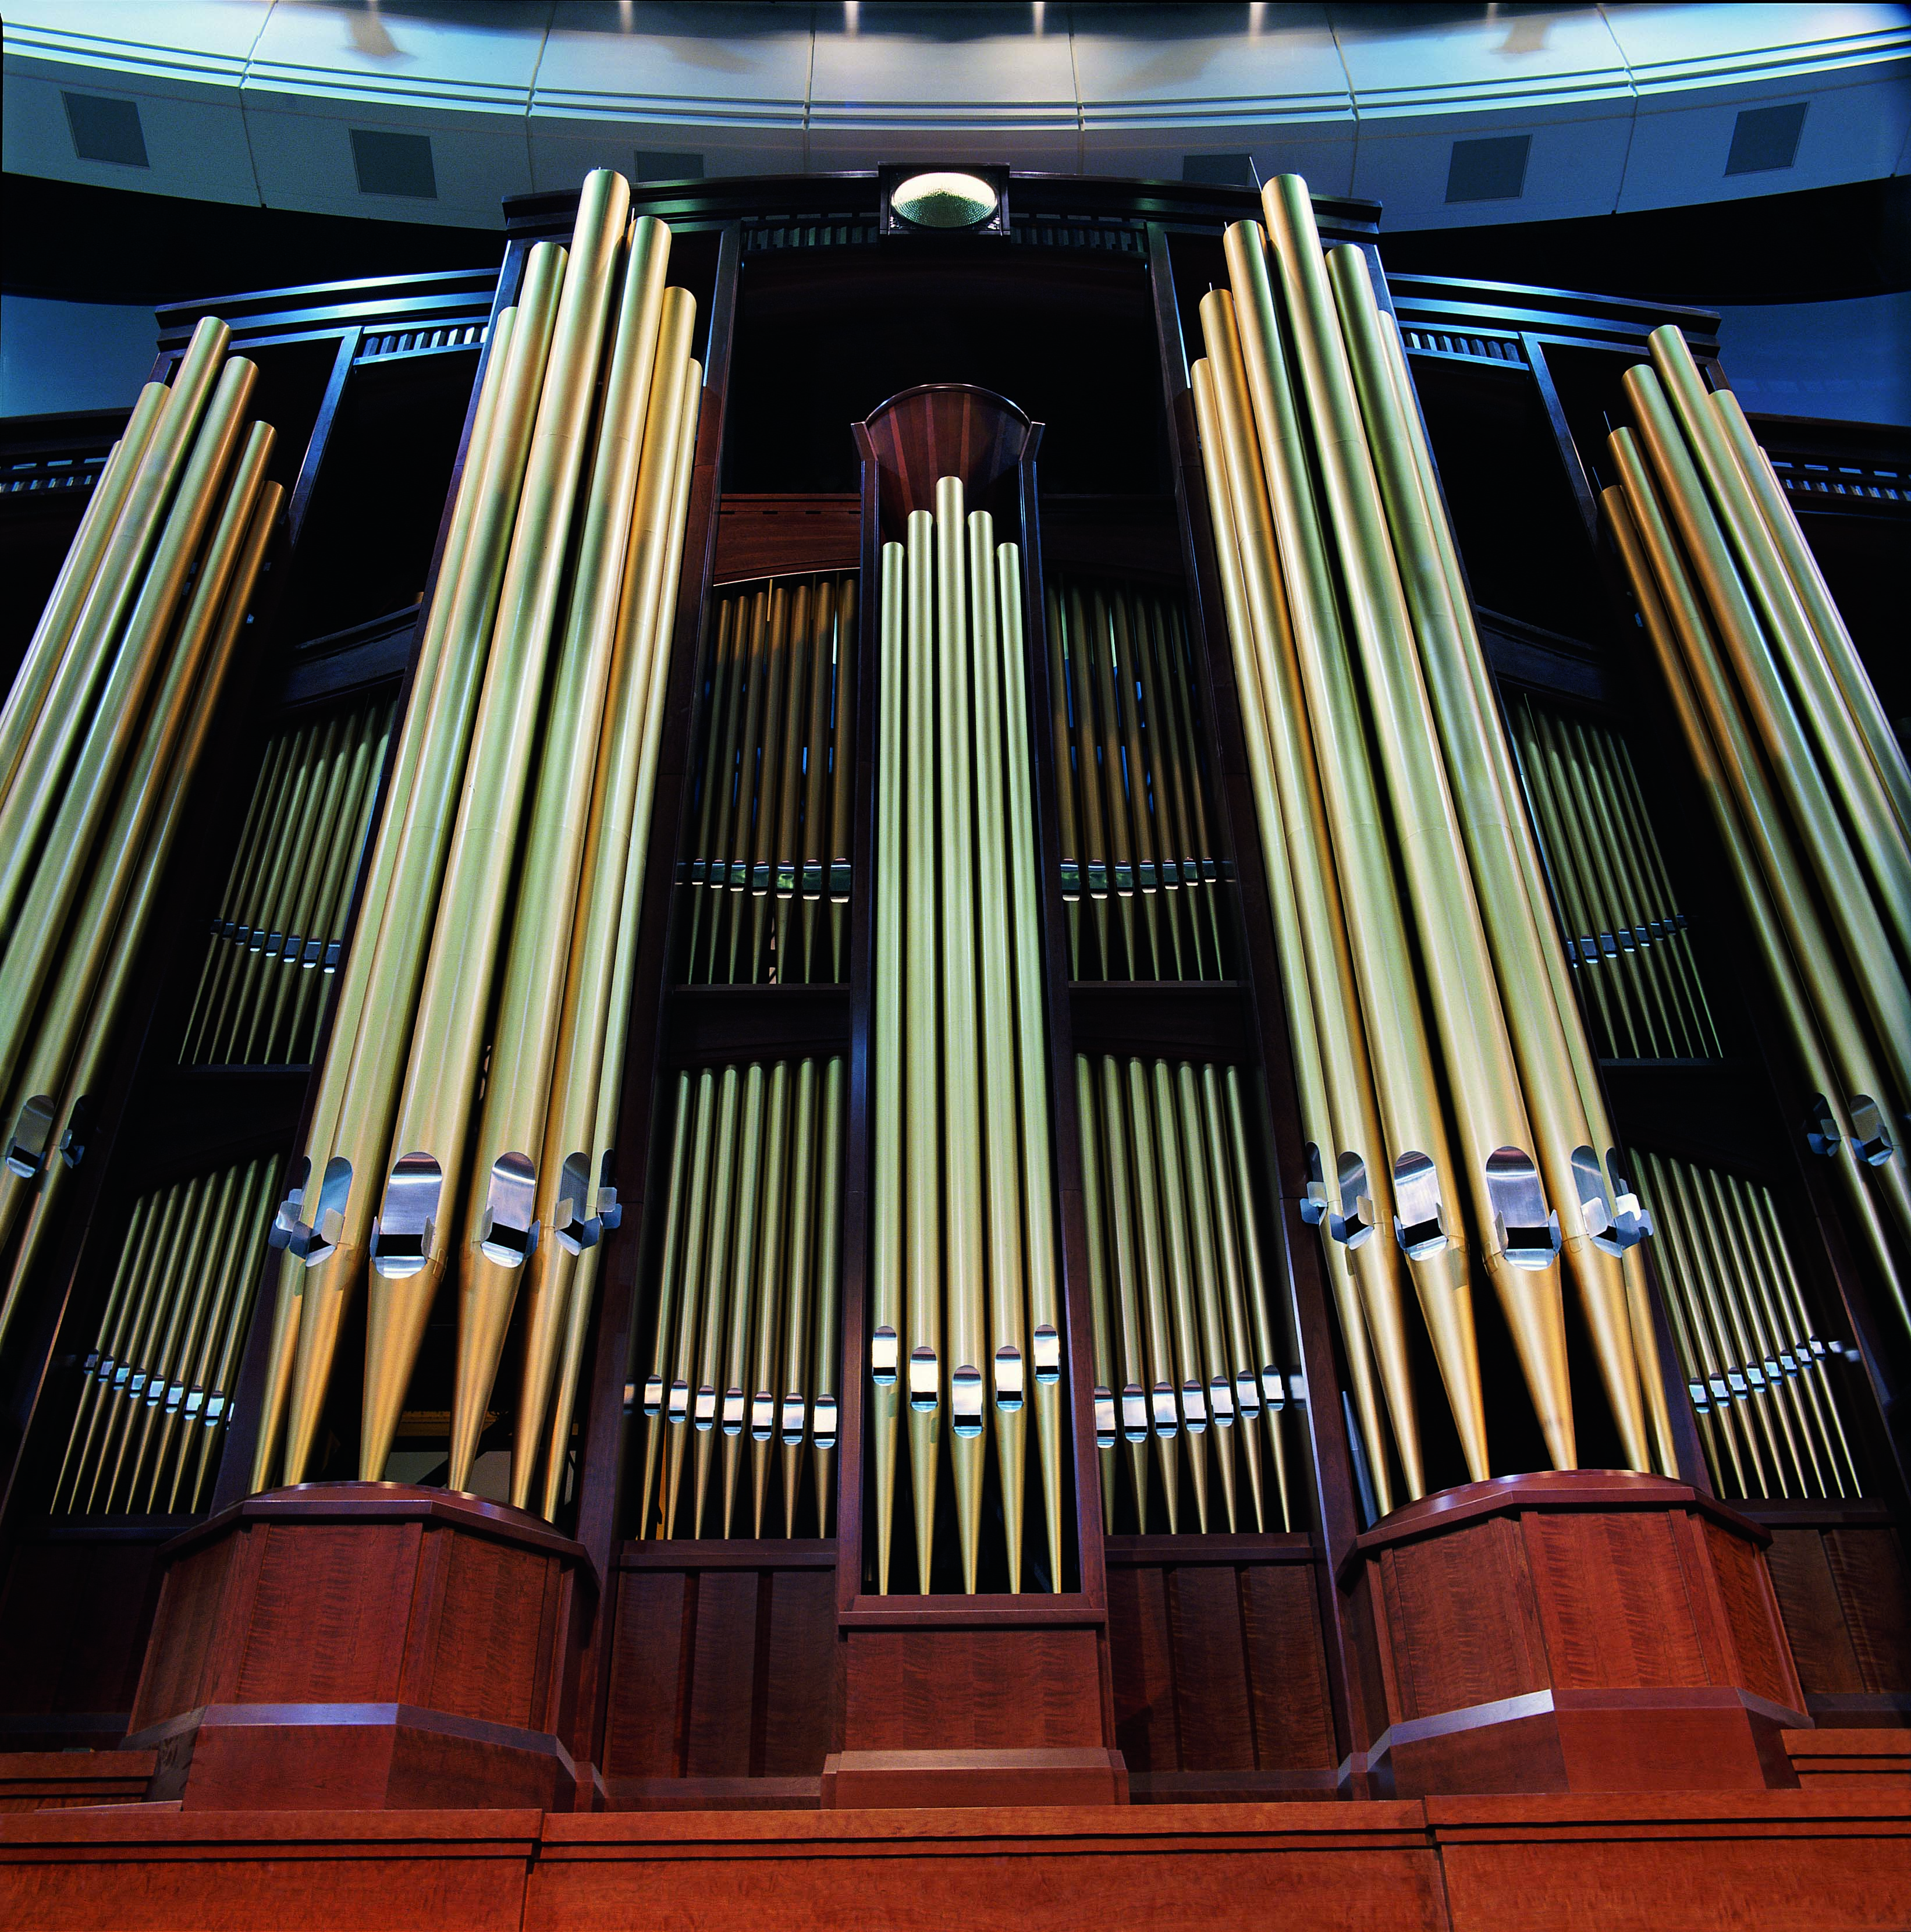 Conference Center organ pipes